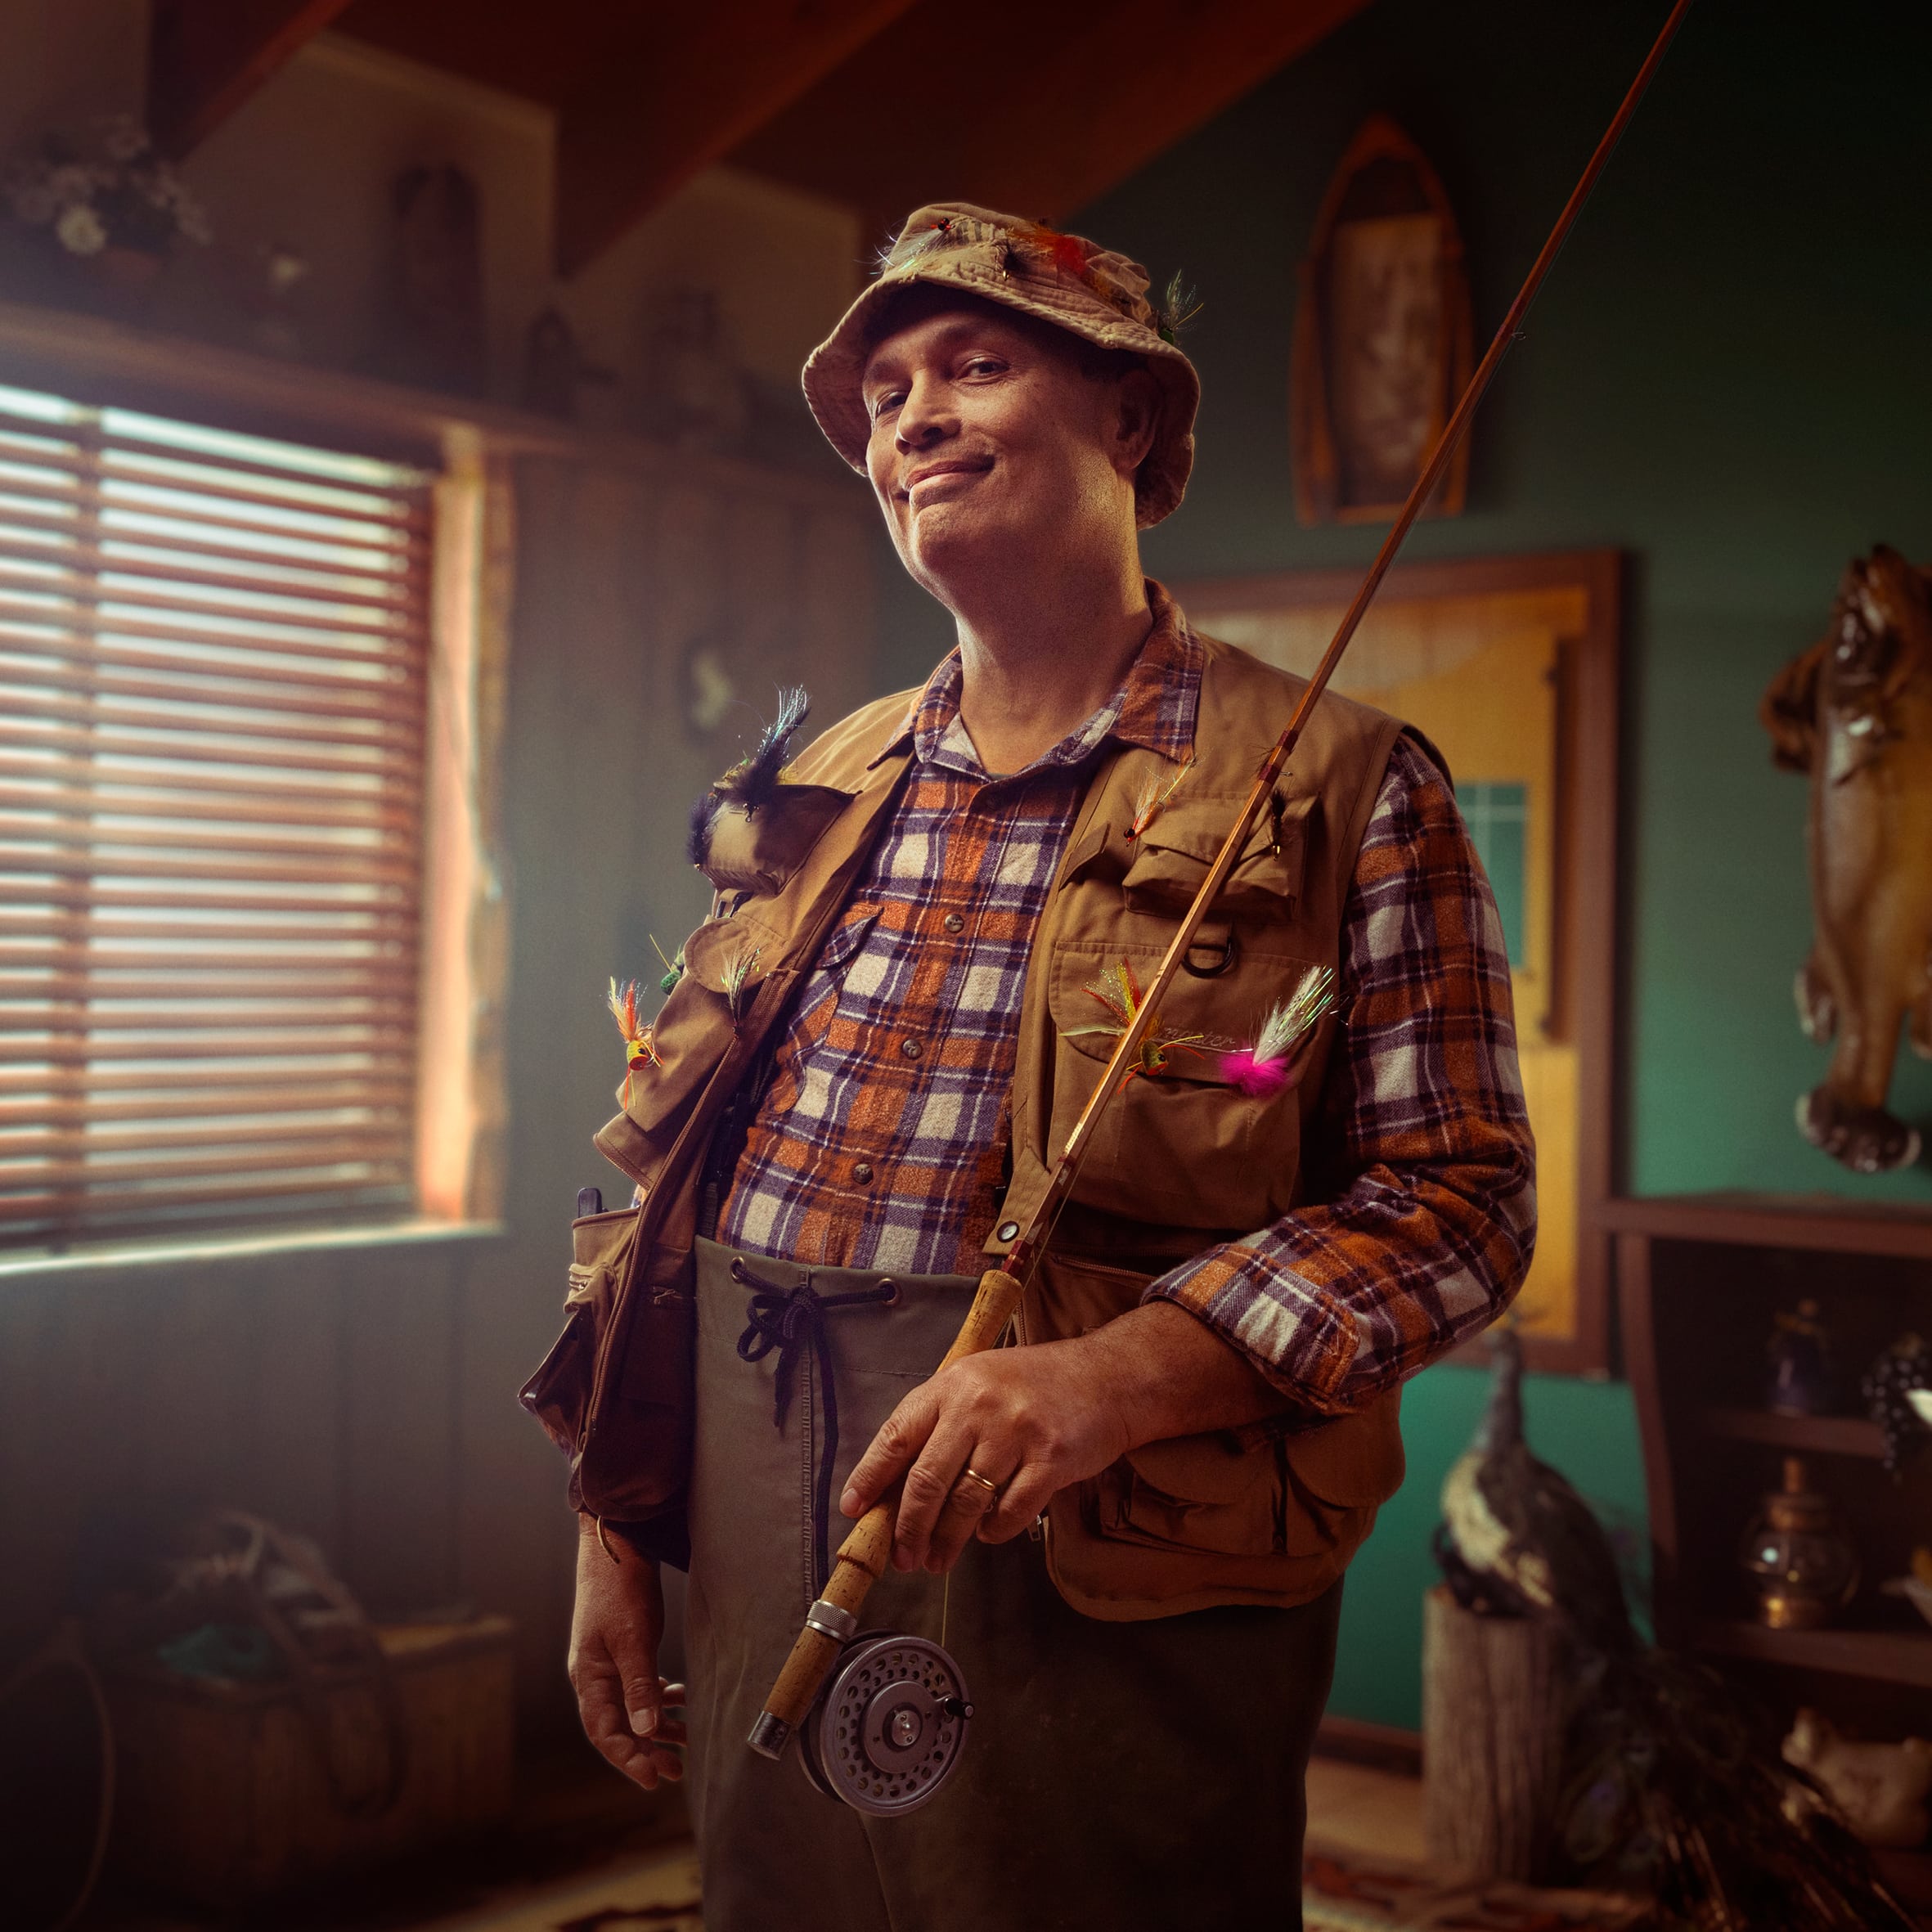 Image of Addiran smiling broadly with fishing attire and a firshing rod in his home